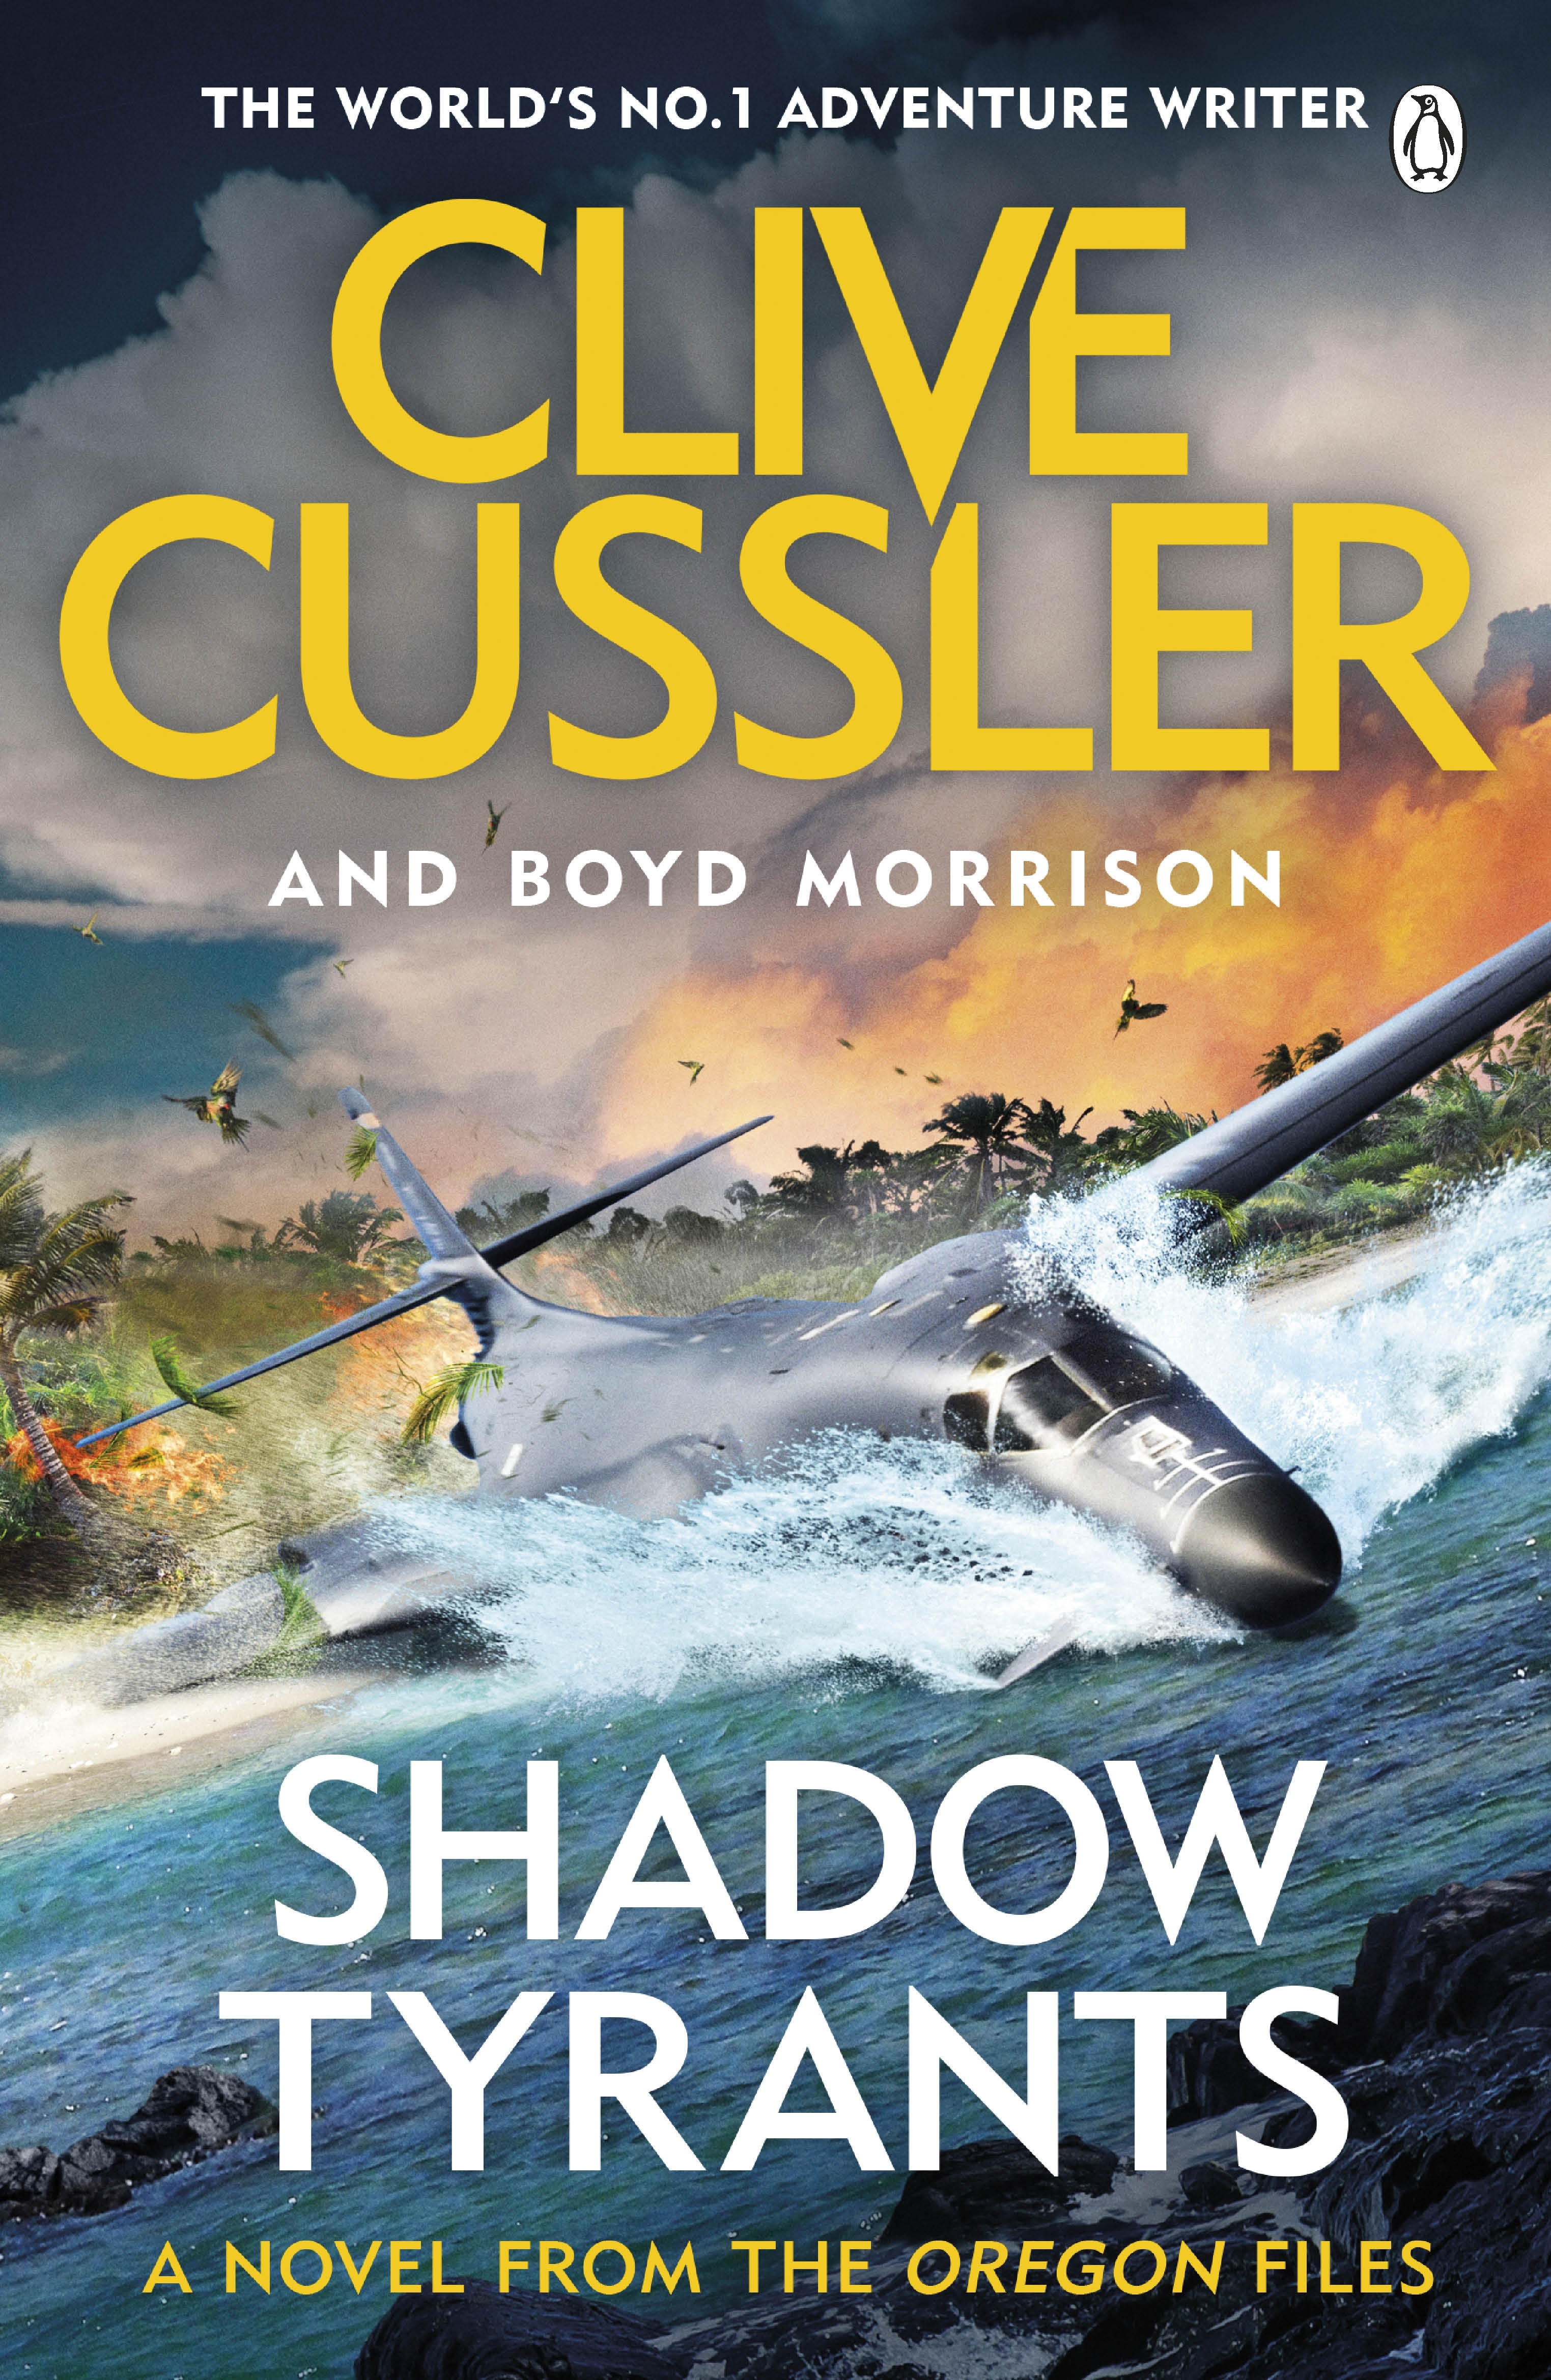 Book “Shadow Tyrants” by Clive Cussler, Boyd Morrison — August 8, 2019